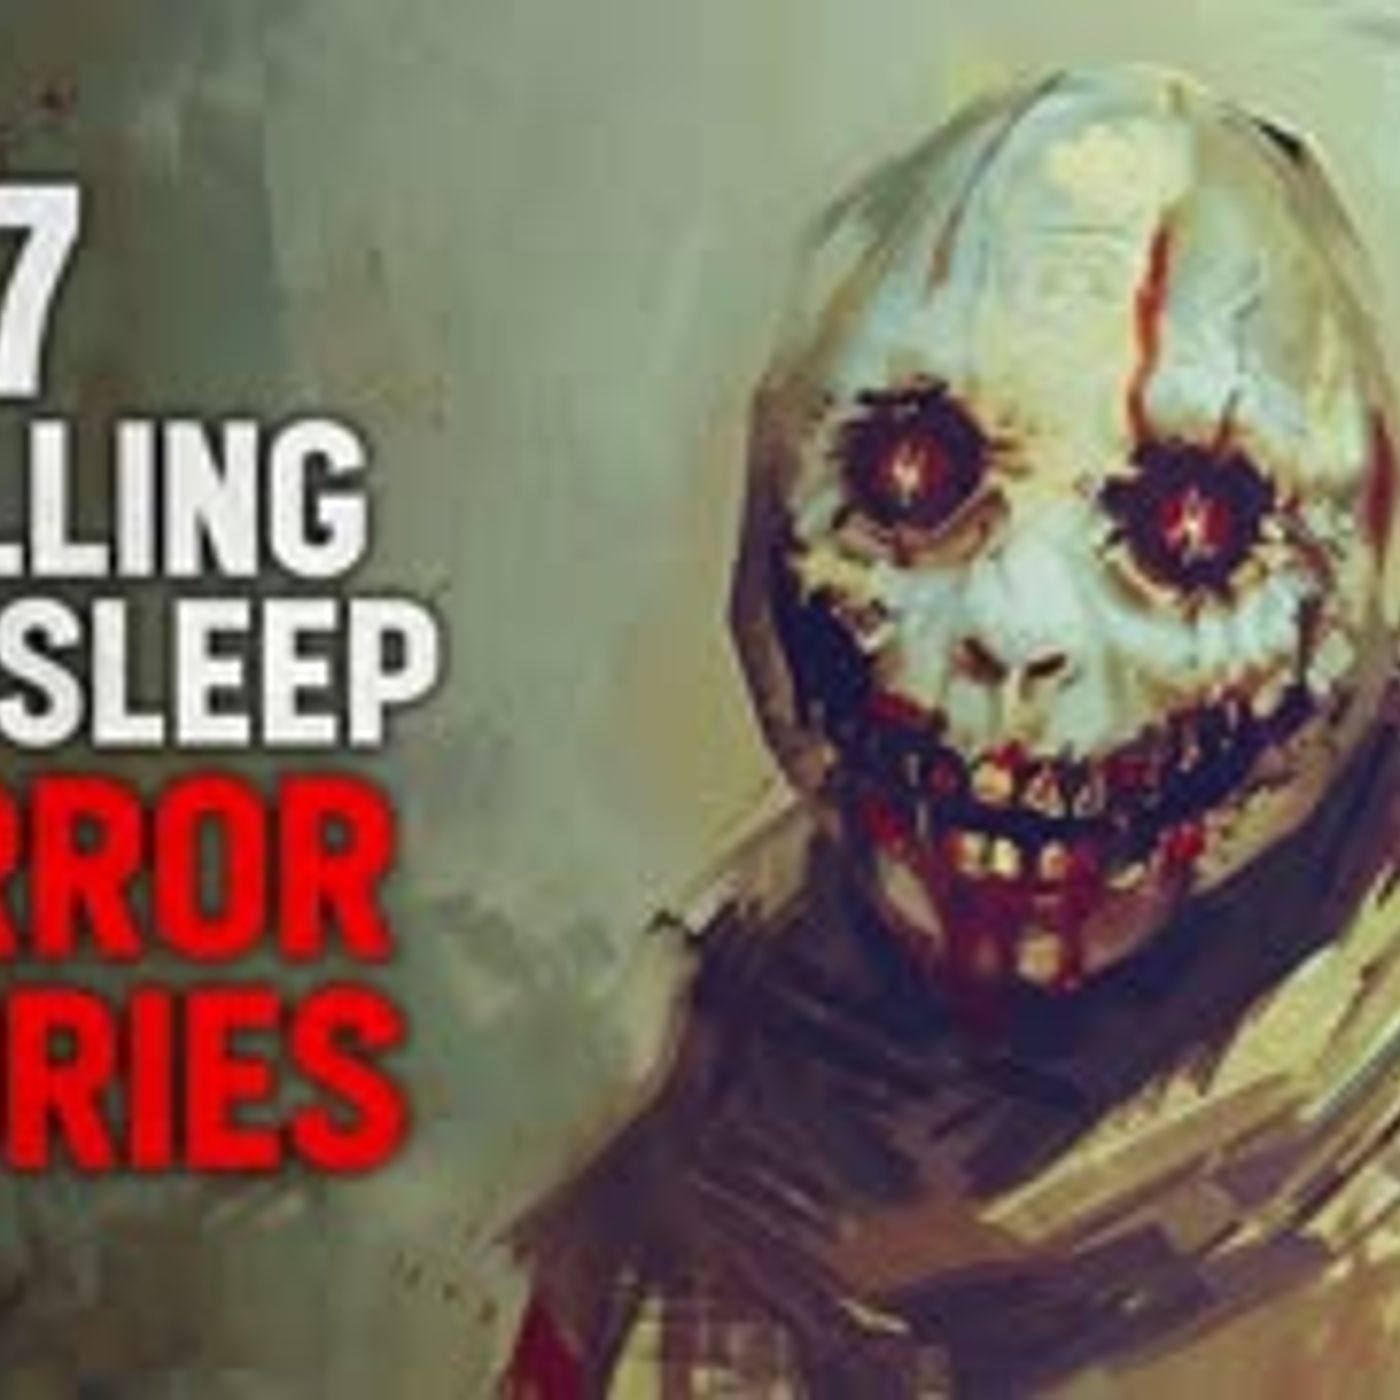 7 CHILLING Reddit r/Nosleep Horror Stories to listen to while crushing bugs in Helldivers 2